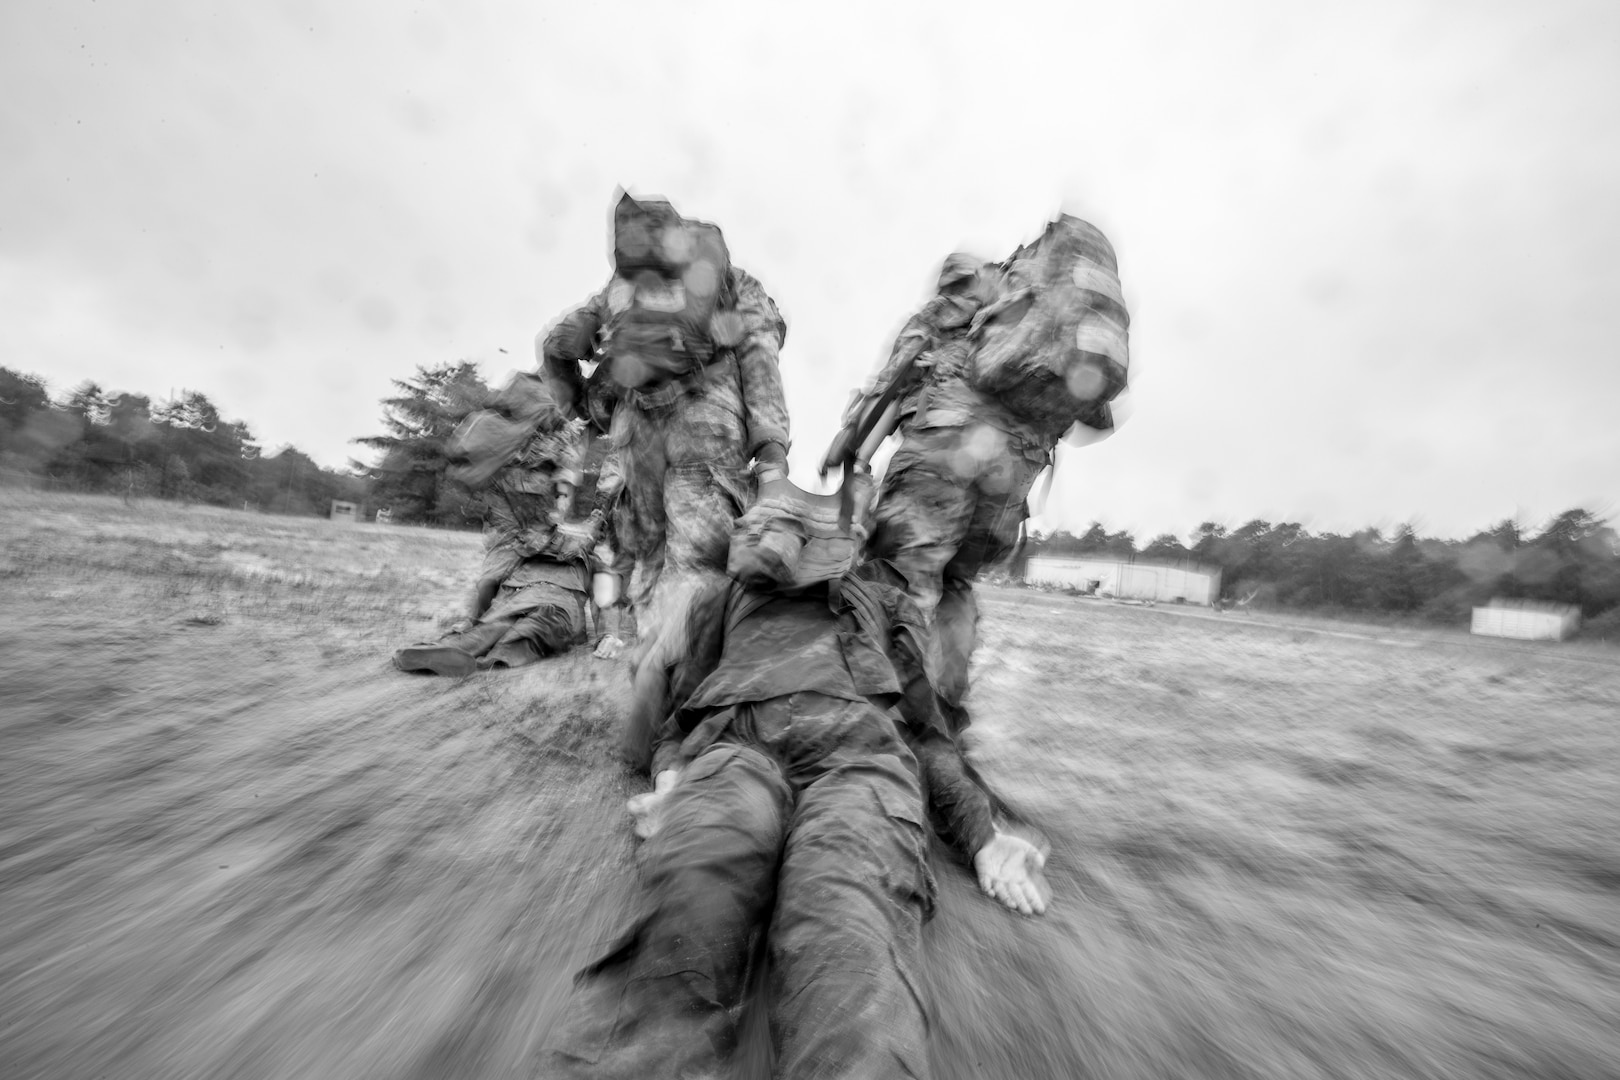 Two teams of two uniformed service members move through a field, with each team pulling a training mannequin across the ground in a field.